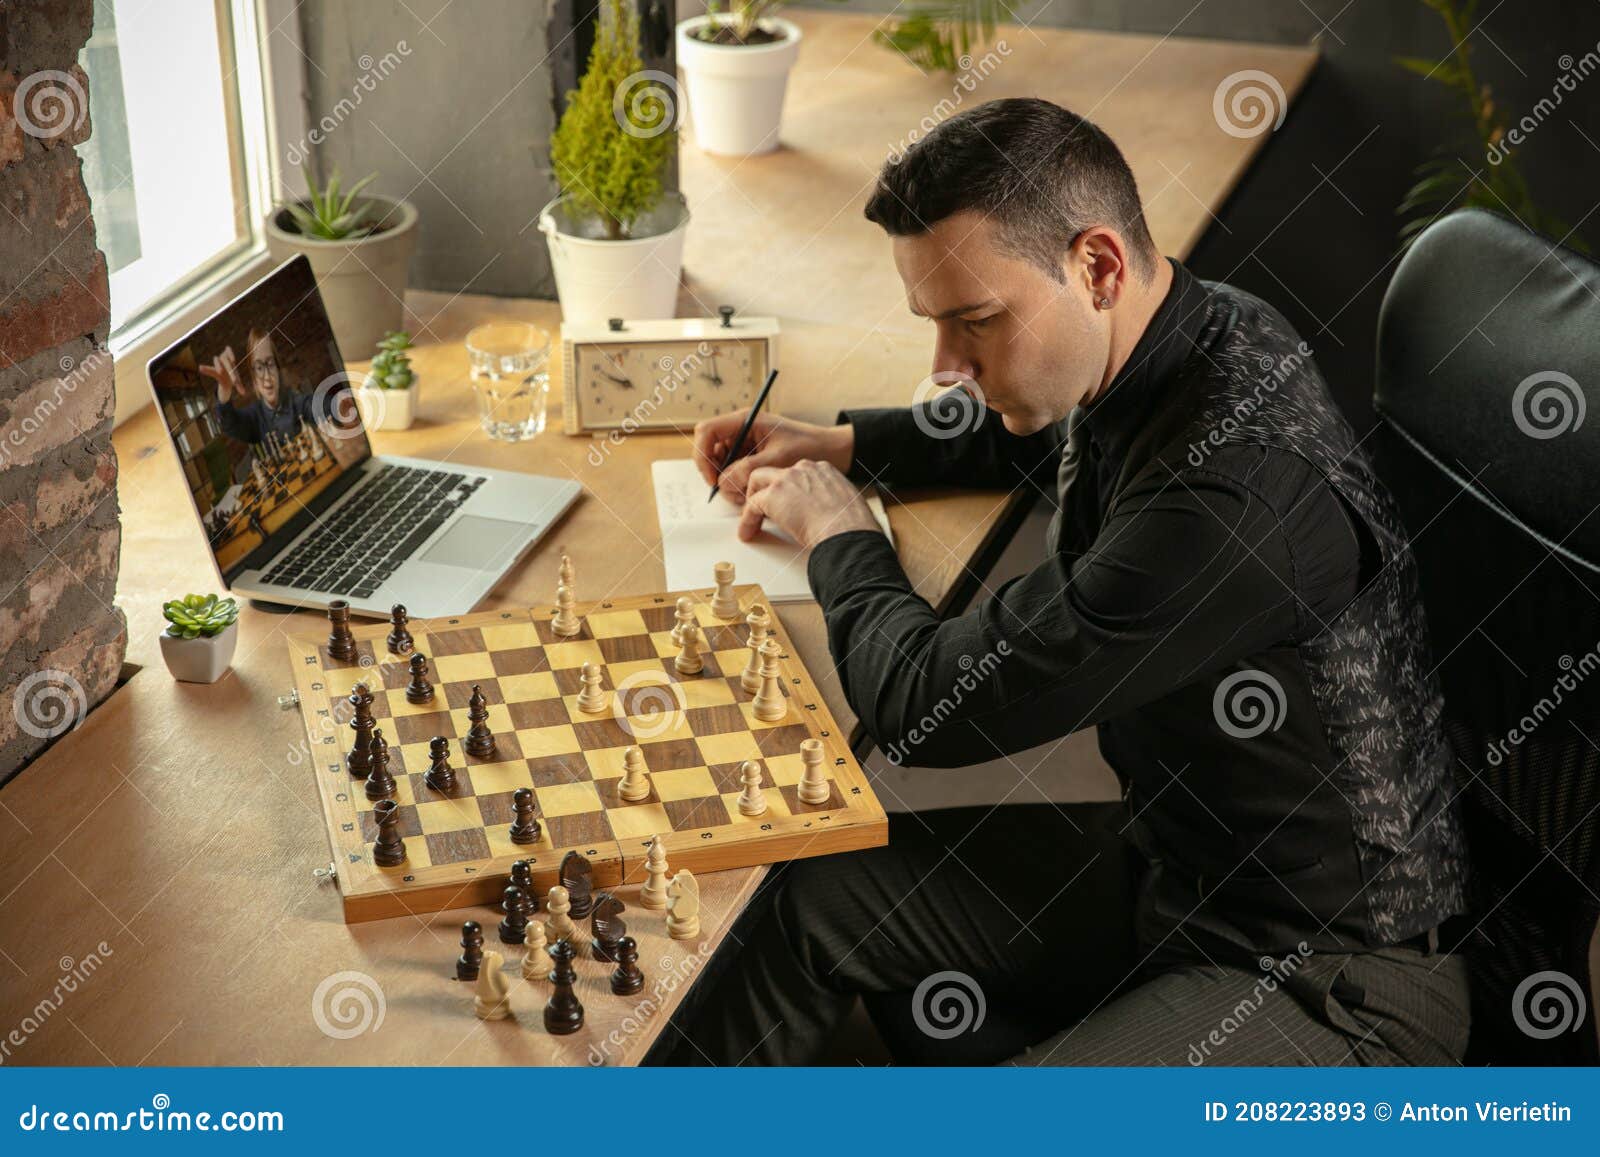 Premium Photo  Playing chess online studying how to play chess